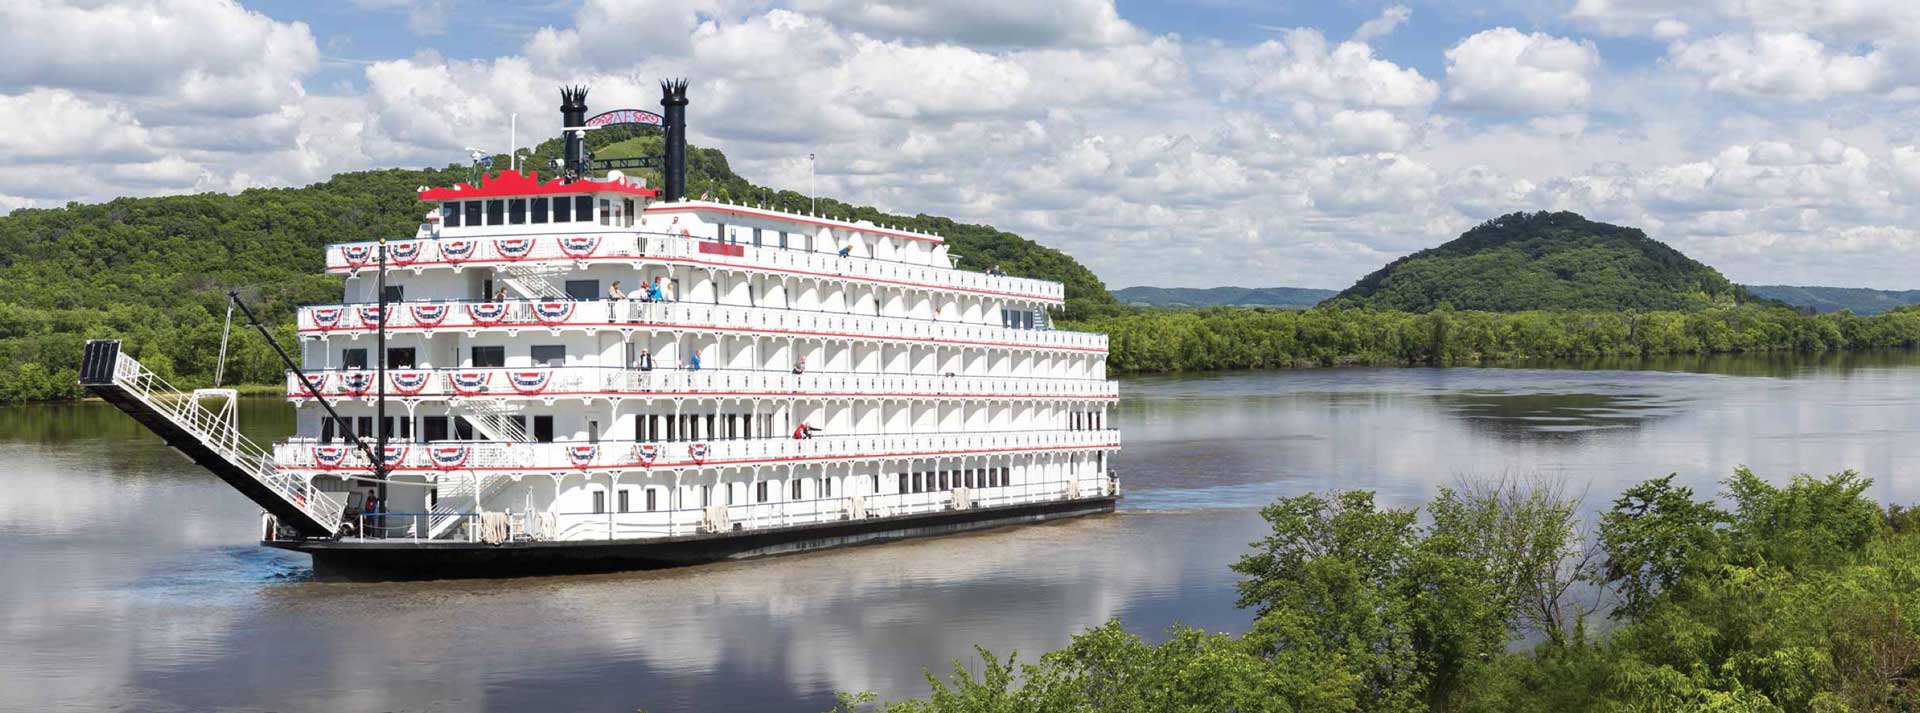 us riverboat cruise lines